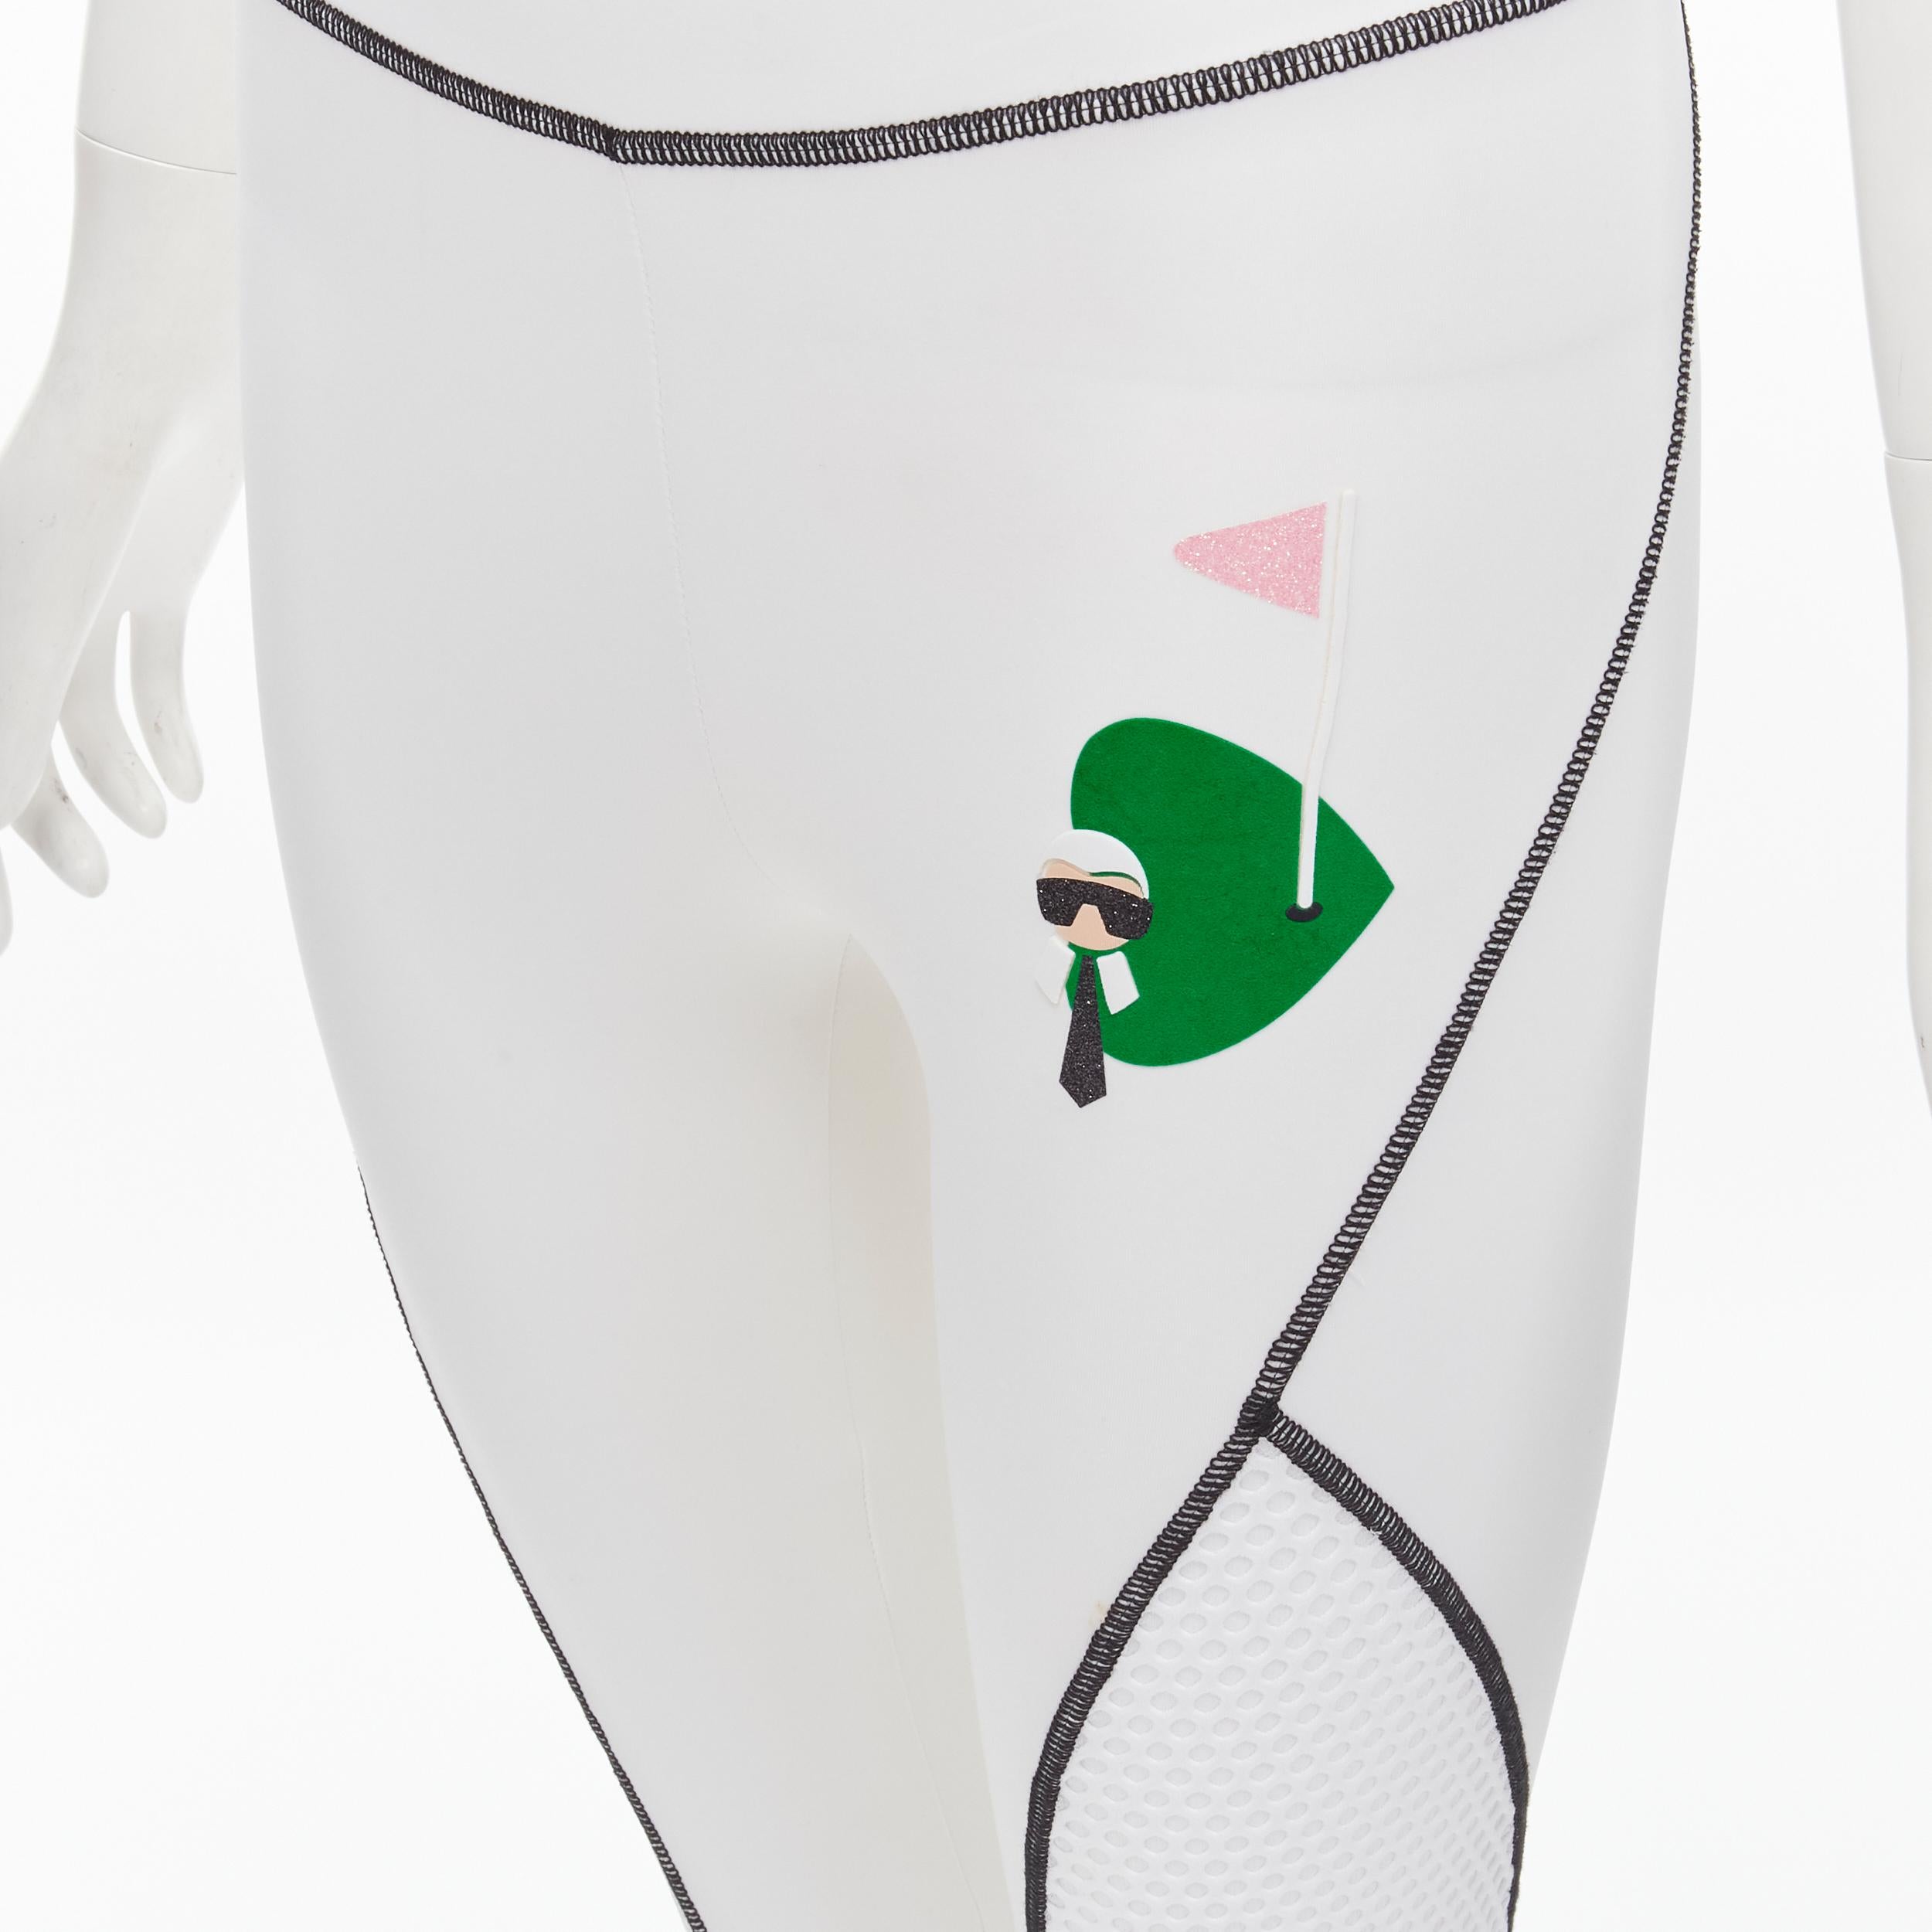 FENDI Karl Loves golf white mesh insert overstitched legging pants XS 
Reference: ANWU/A00540 
Brand: Fendi 
Collection: Karl Loves 
Material: Feels like polyester 
Color: White 
Pattern: Solid 
Extra Detail: Karl Loves gold flitter design at front.